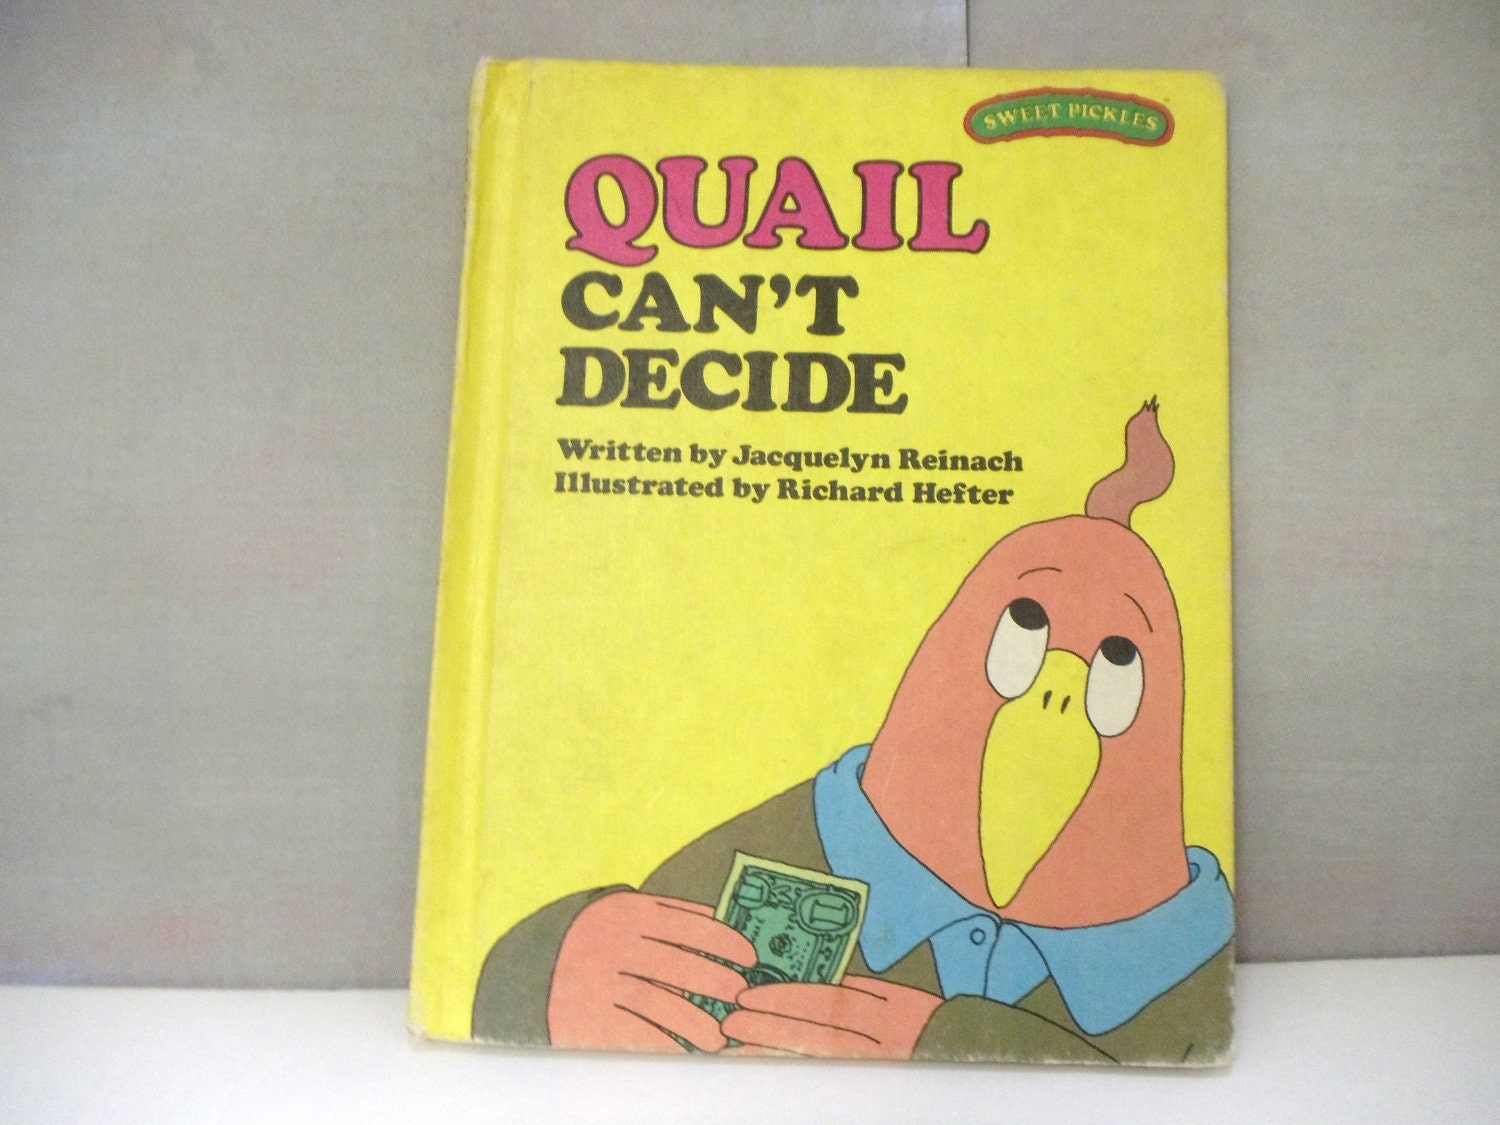 Quail Can't Decide (Sweet Pickles Series) Jacquelyn Reinach and Richard Hefter